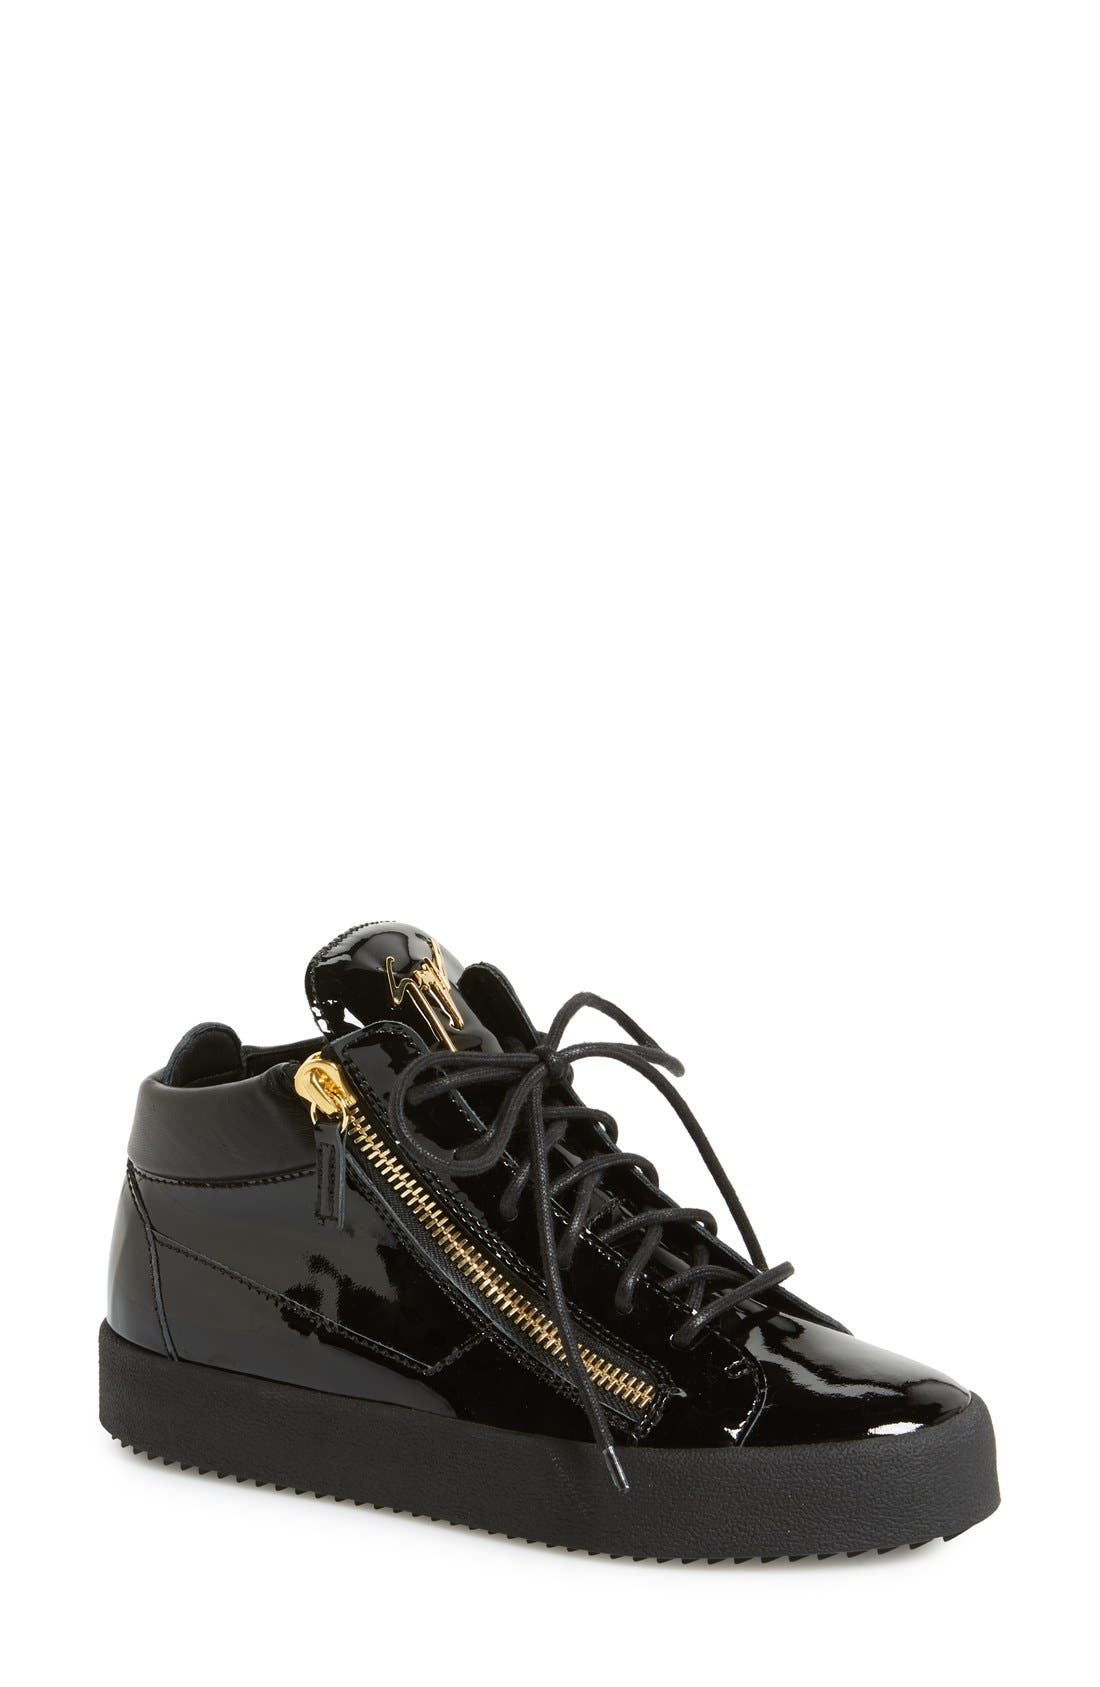 black patent leather high top sneakers